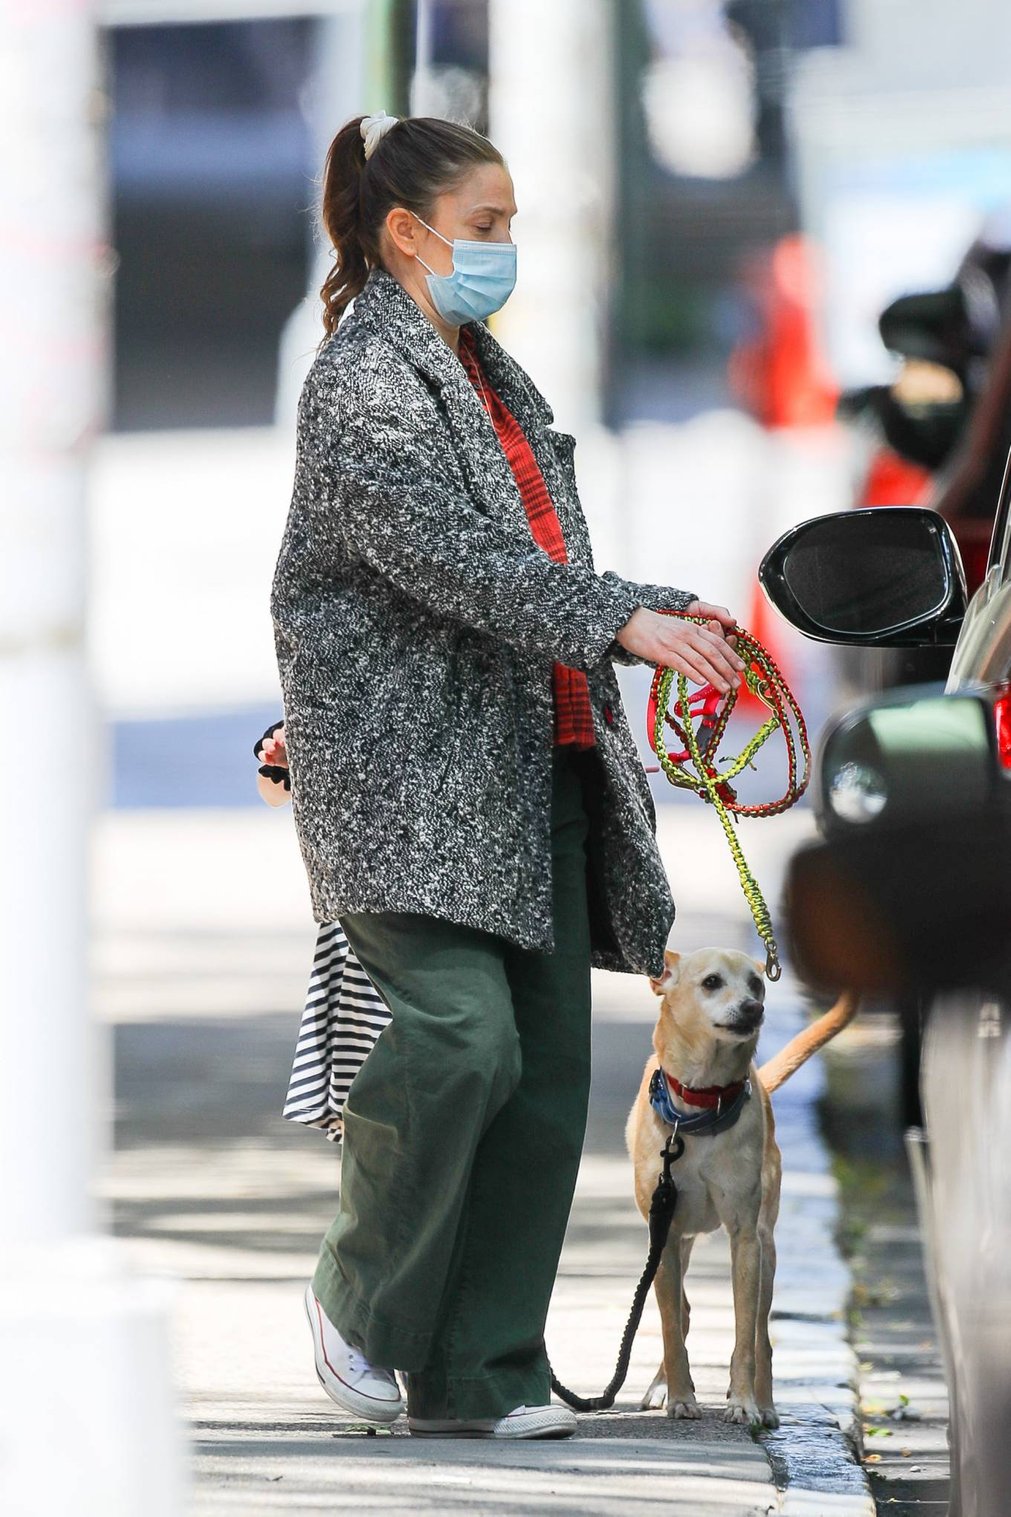 Drew Barrymore 2021 : Drew Barrymore – Seen with her dog while out and about in New York-06